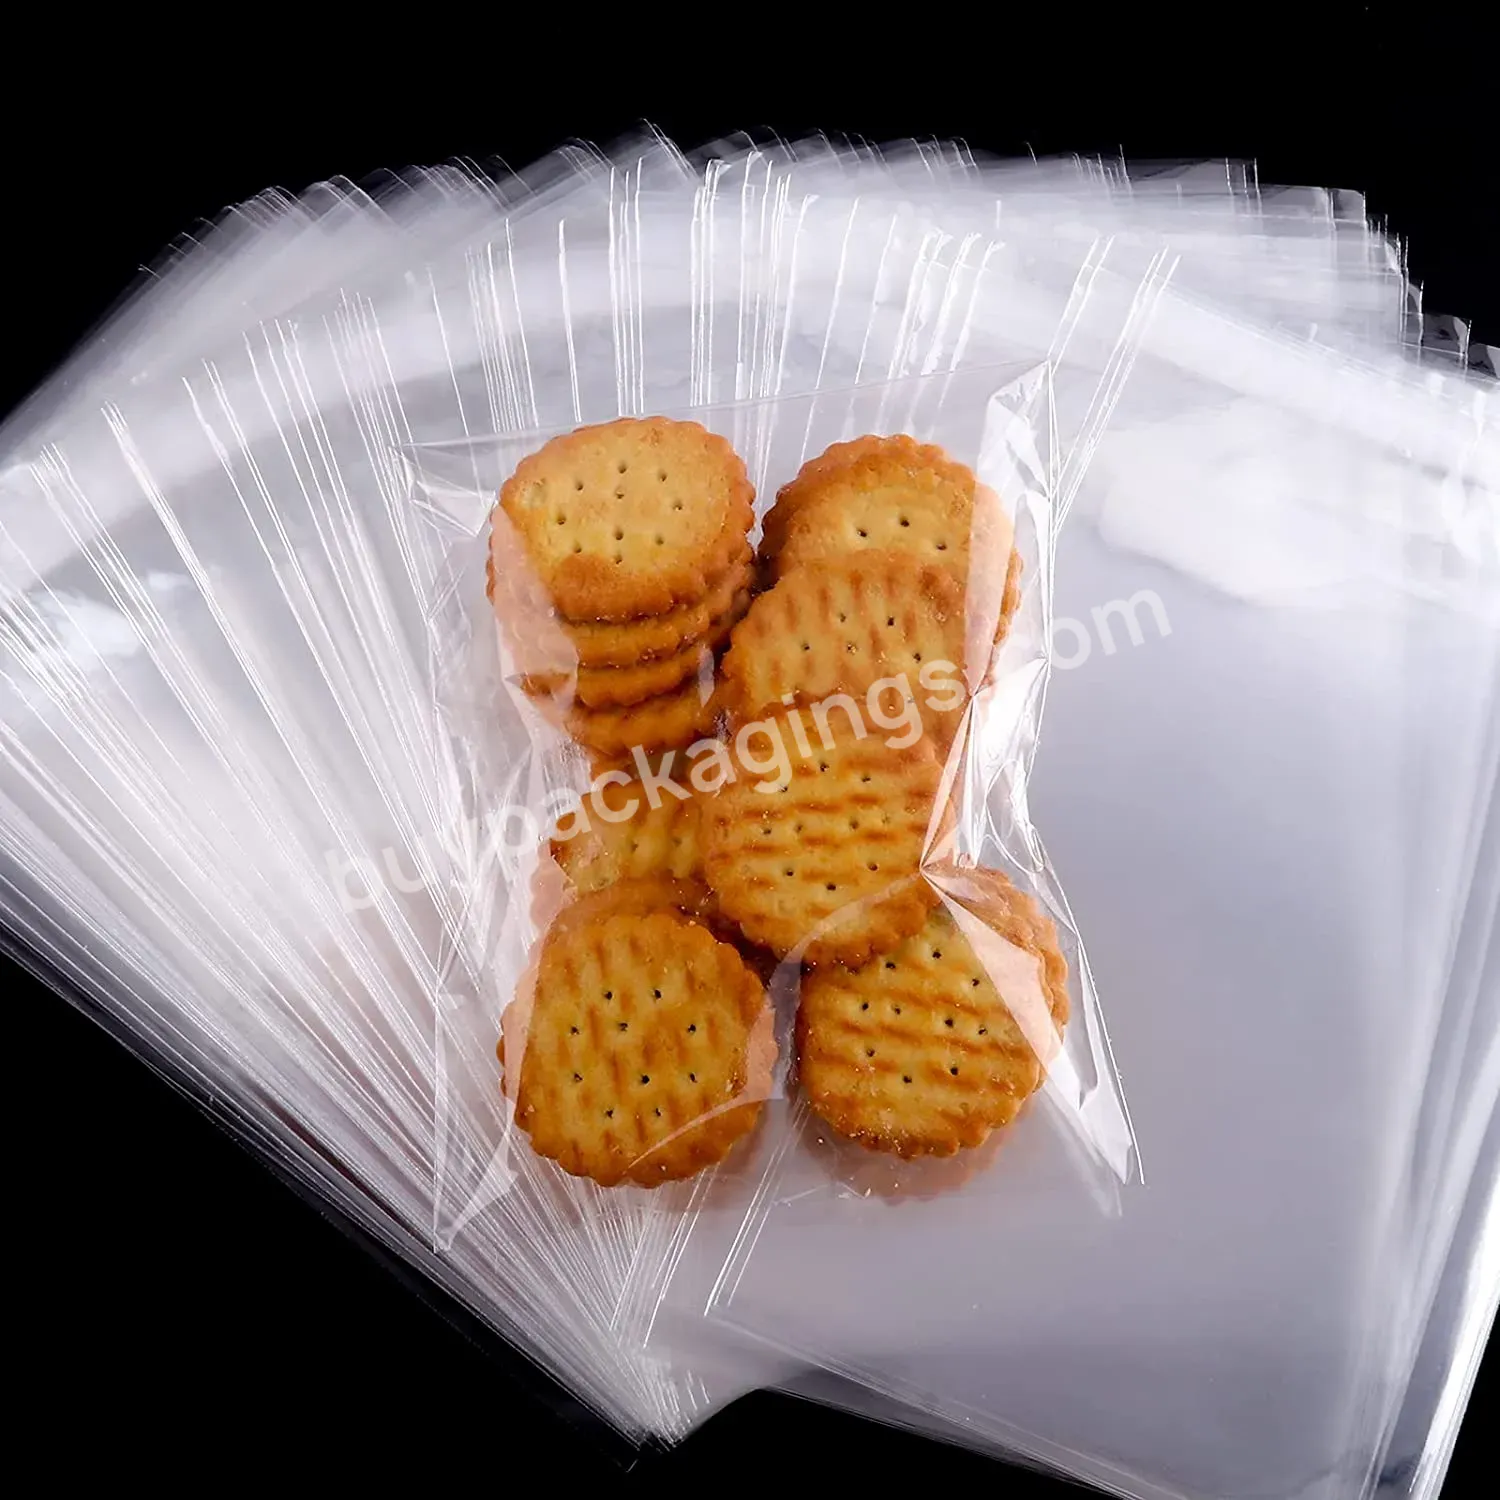 Clear Opp Cellophane Bags Self Adhesive Bag For Storing Bread,Biscuits,Cookie - Buy Clear Cellophane Bags,Self Adhesive Bag For Storing Bread,Clear Opp Bag For Cookie.